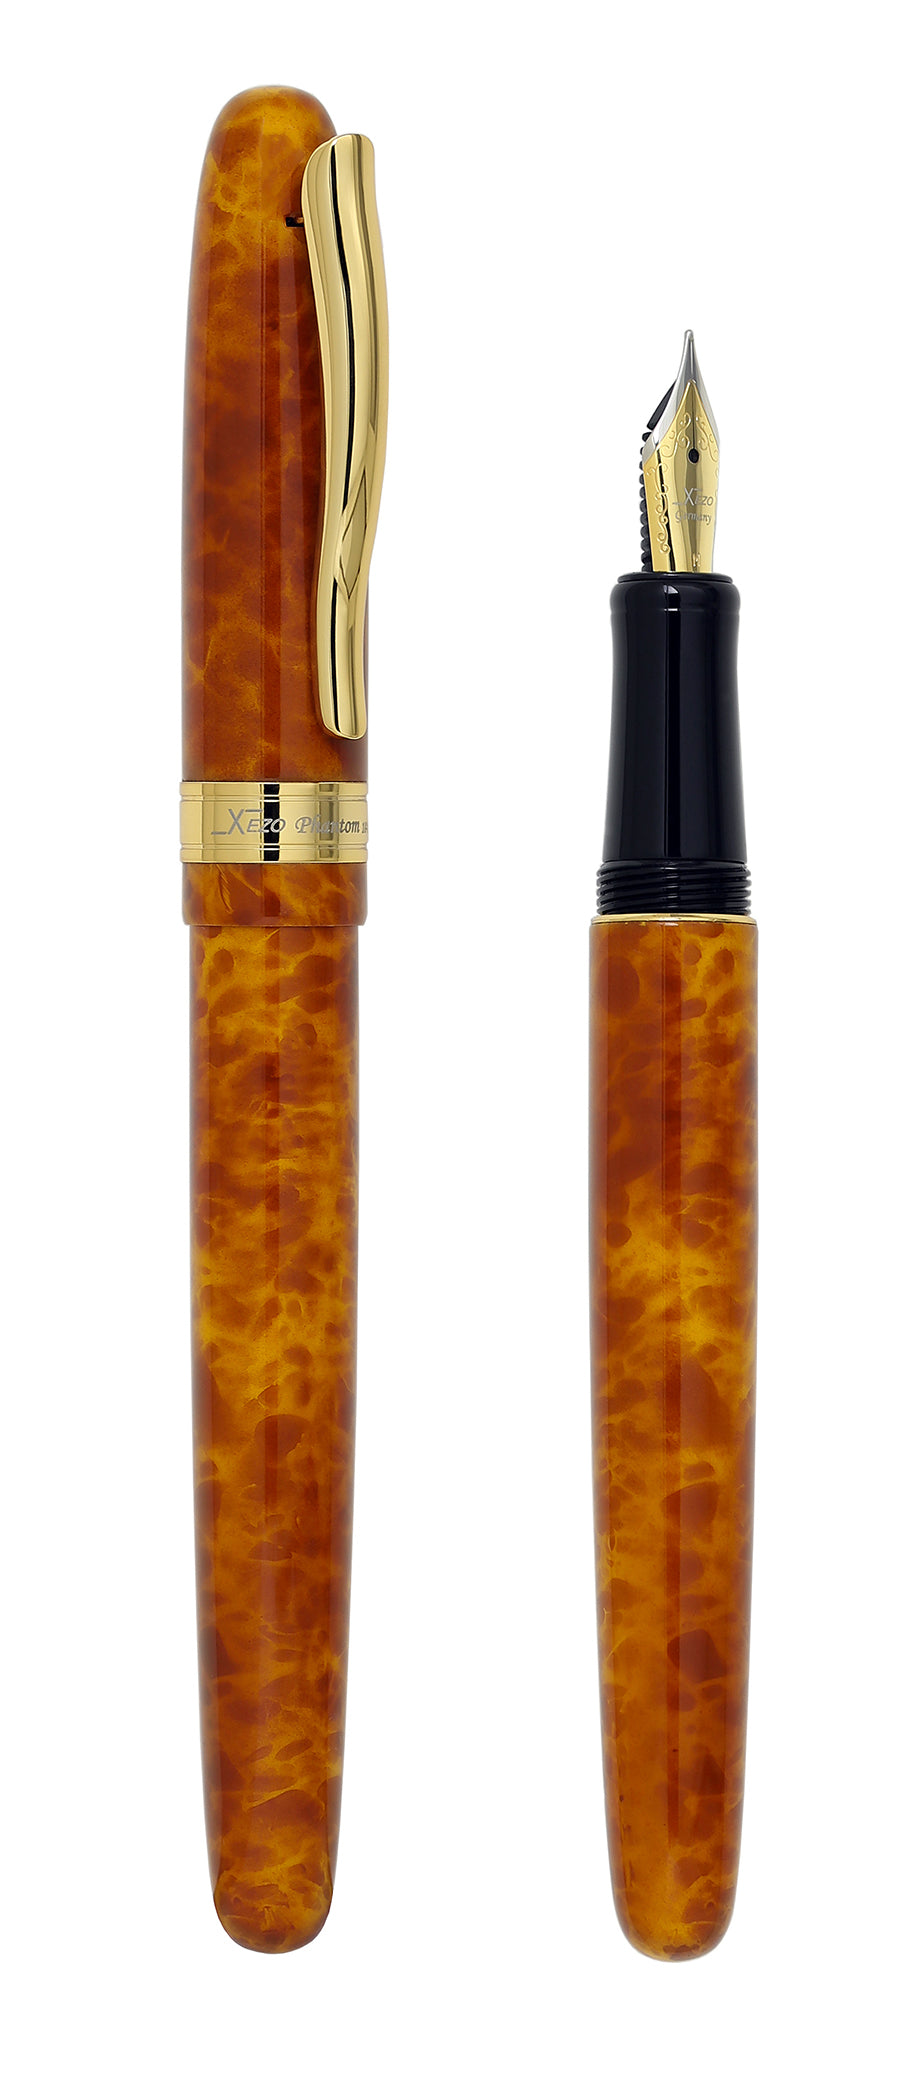 Xezo – Comparison between 3/4 view of the capped and uncapped Phantom Autumn FM fountain pens